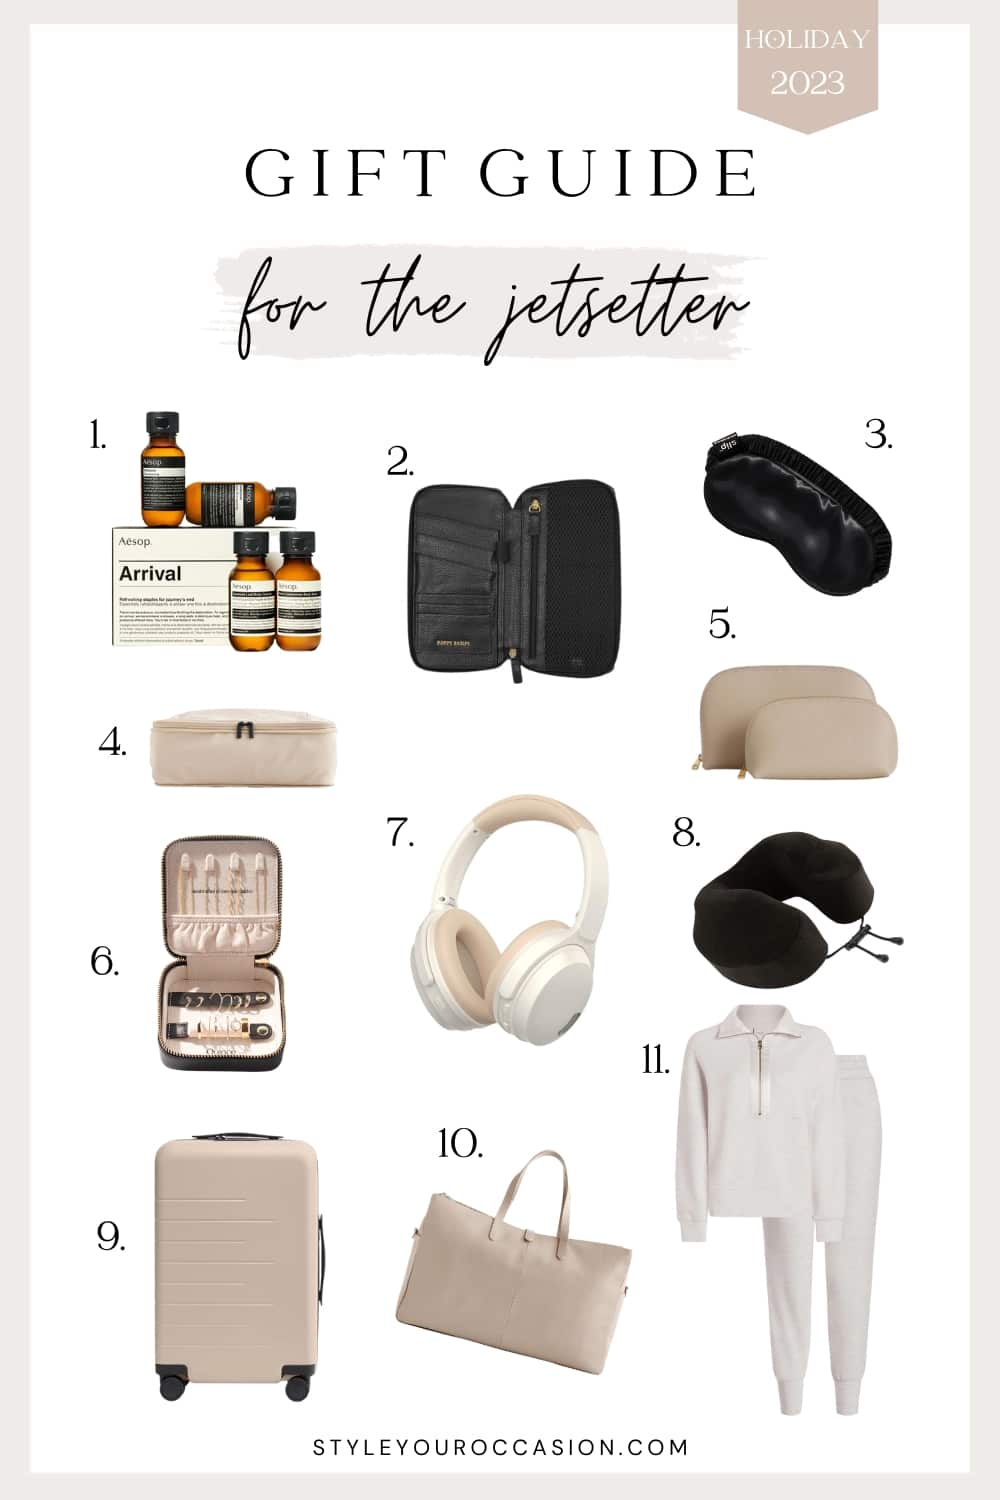 An image board with holiday gift ideas for the jet setter, including a leather travel case set, headphones, a comfy set, luggage, and more